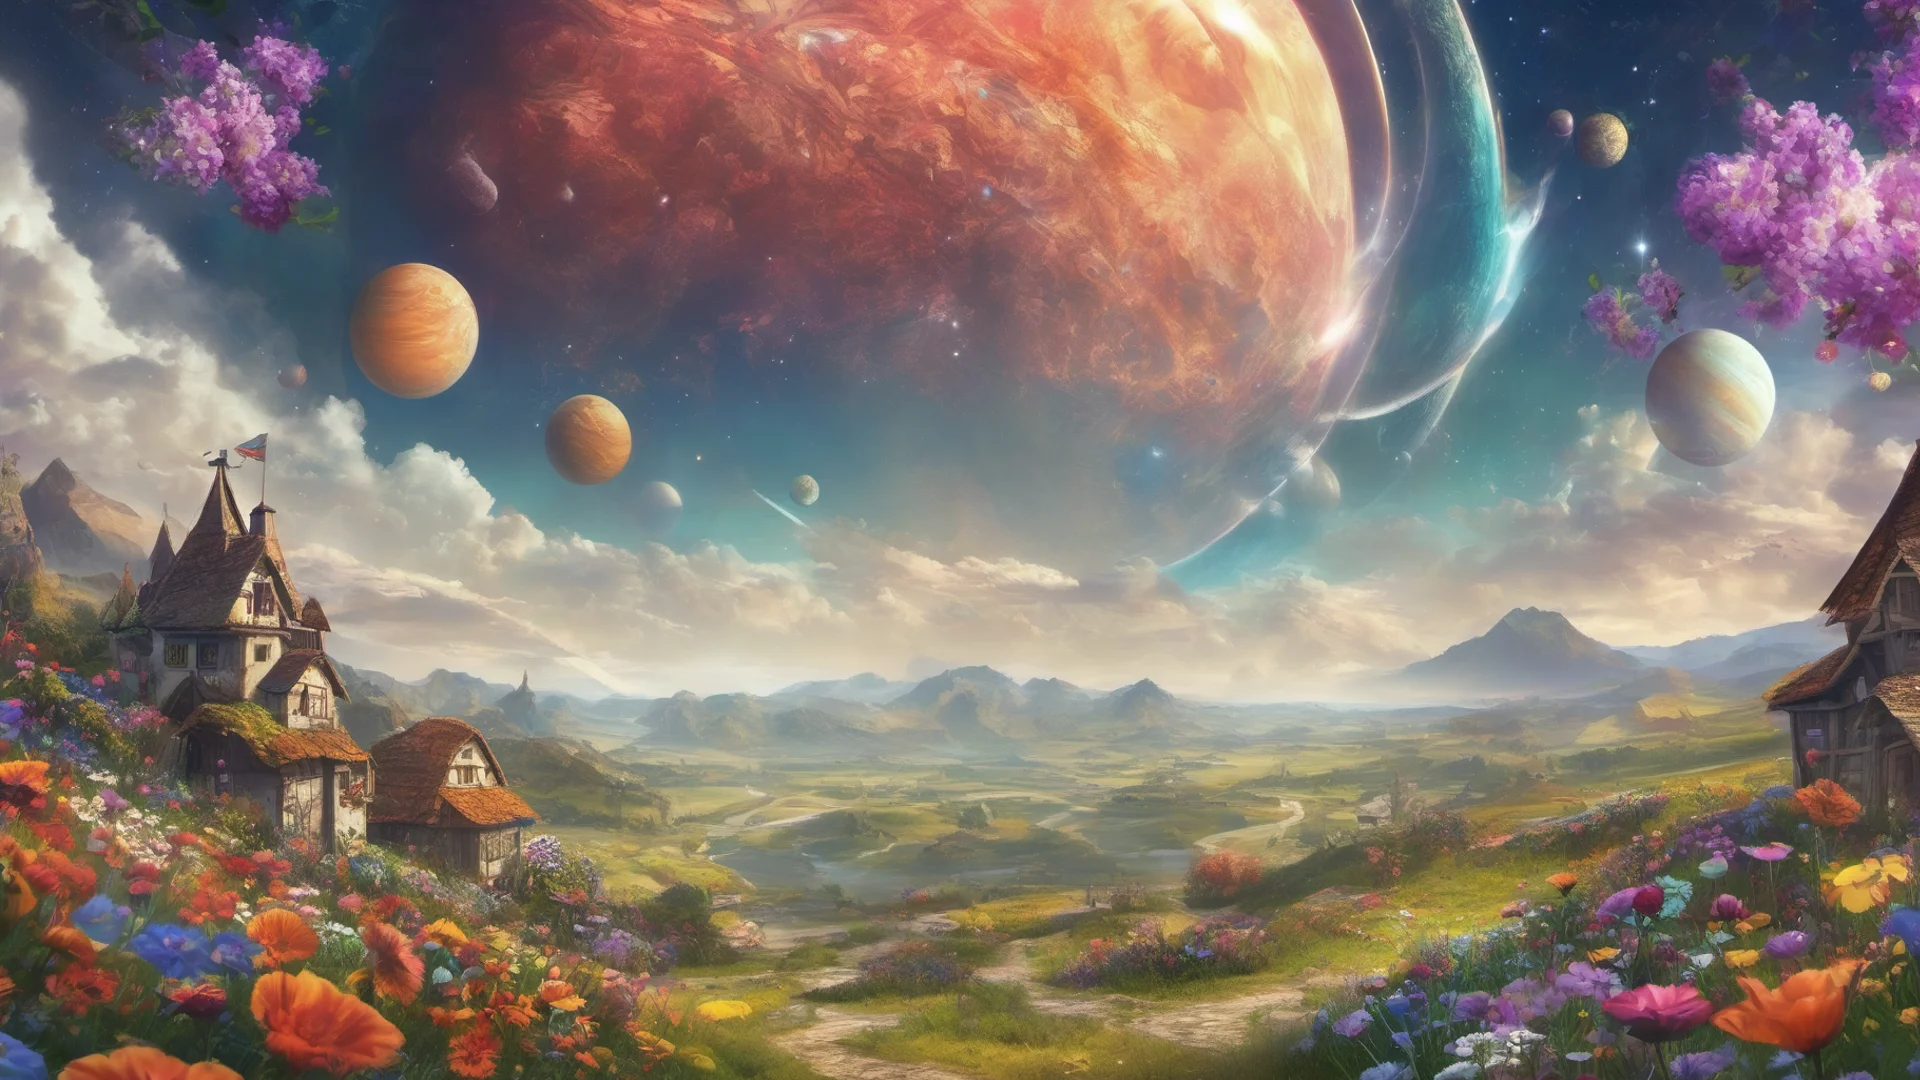 aiepic fantasy background colorful flower meadows village covered in flowers two saturn ringed planets overhead wide